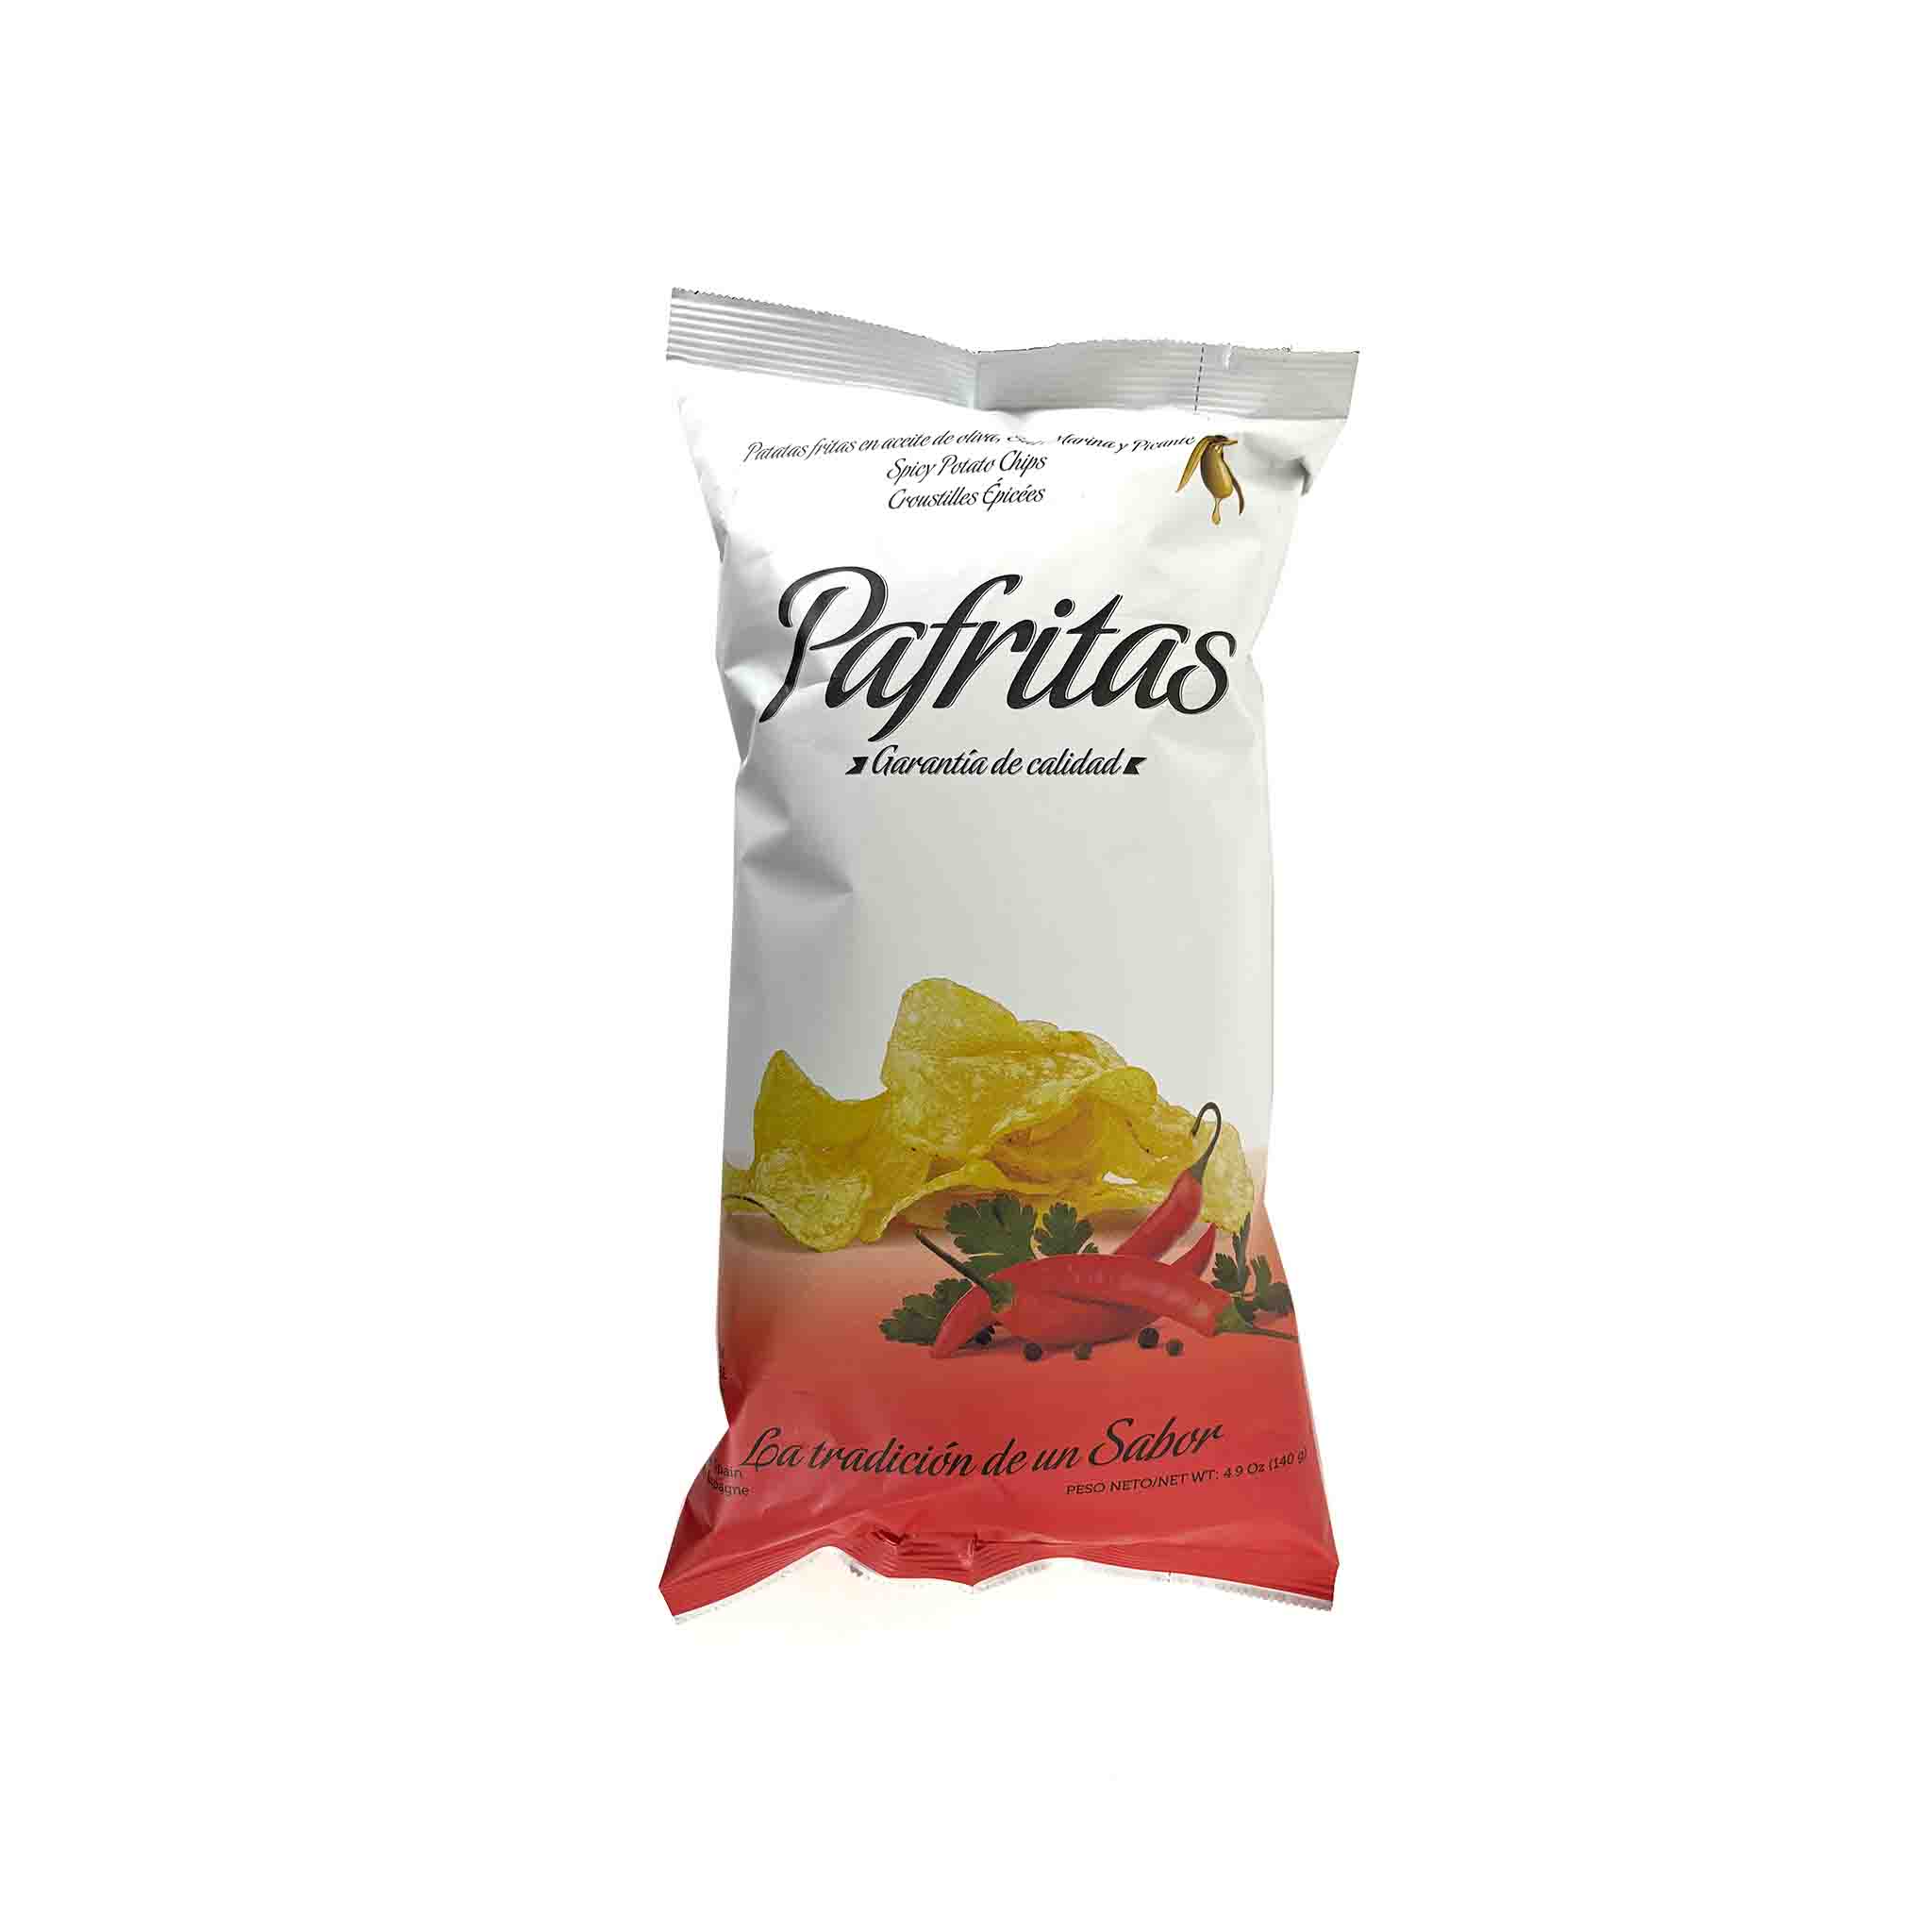 SPANISH PAFRITAS SPICY CHIPS 140g